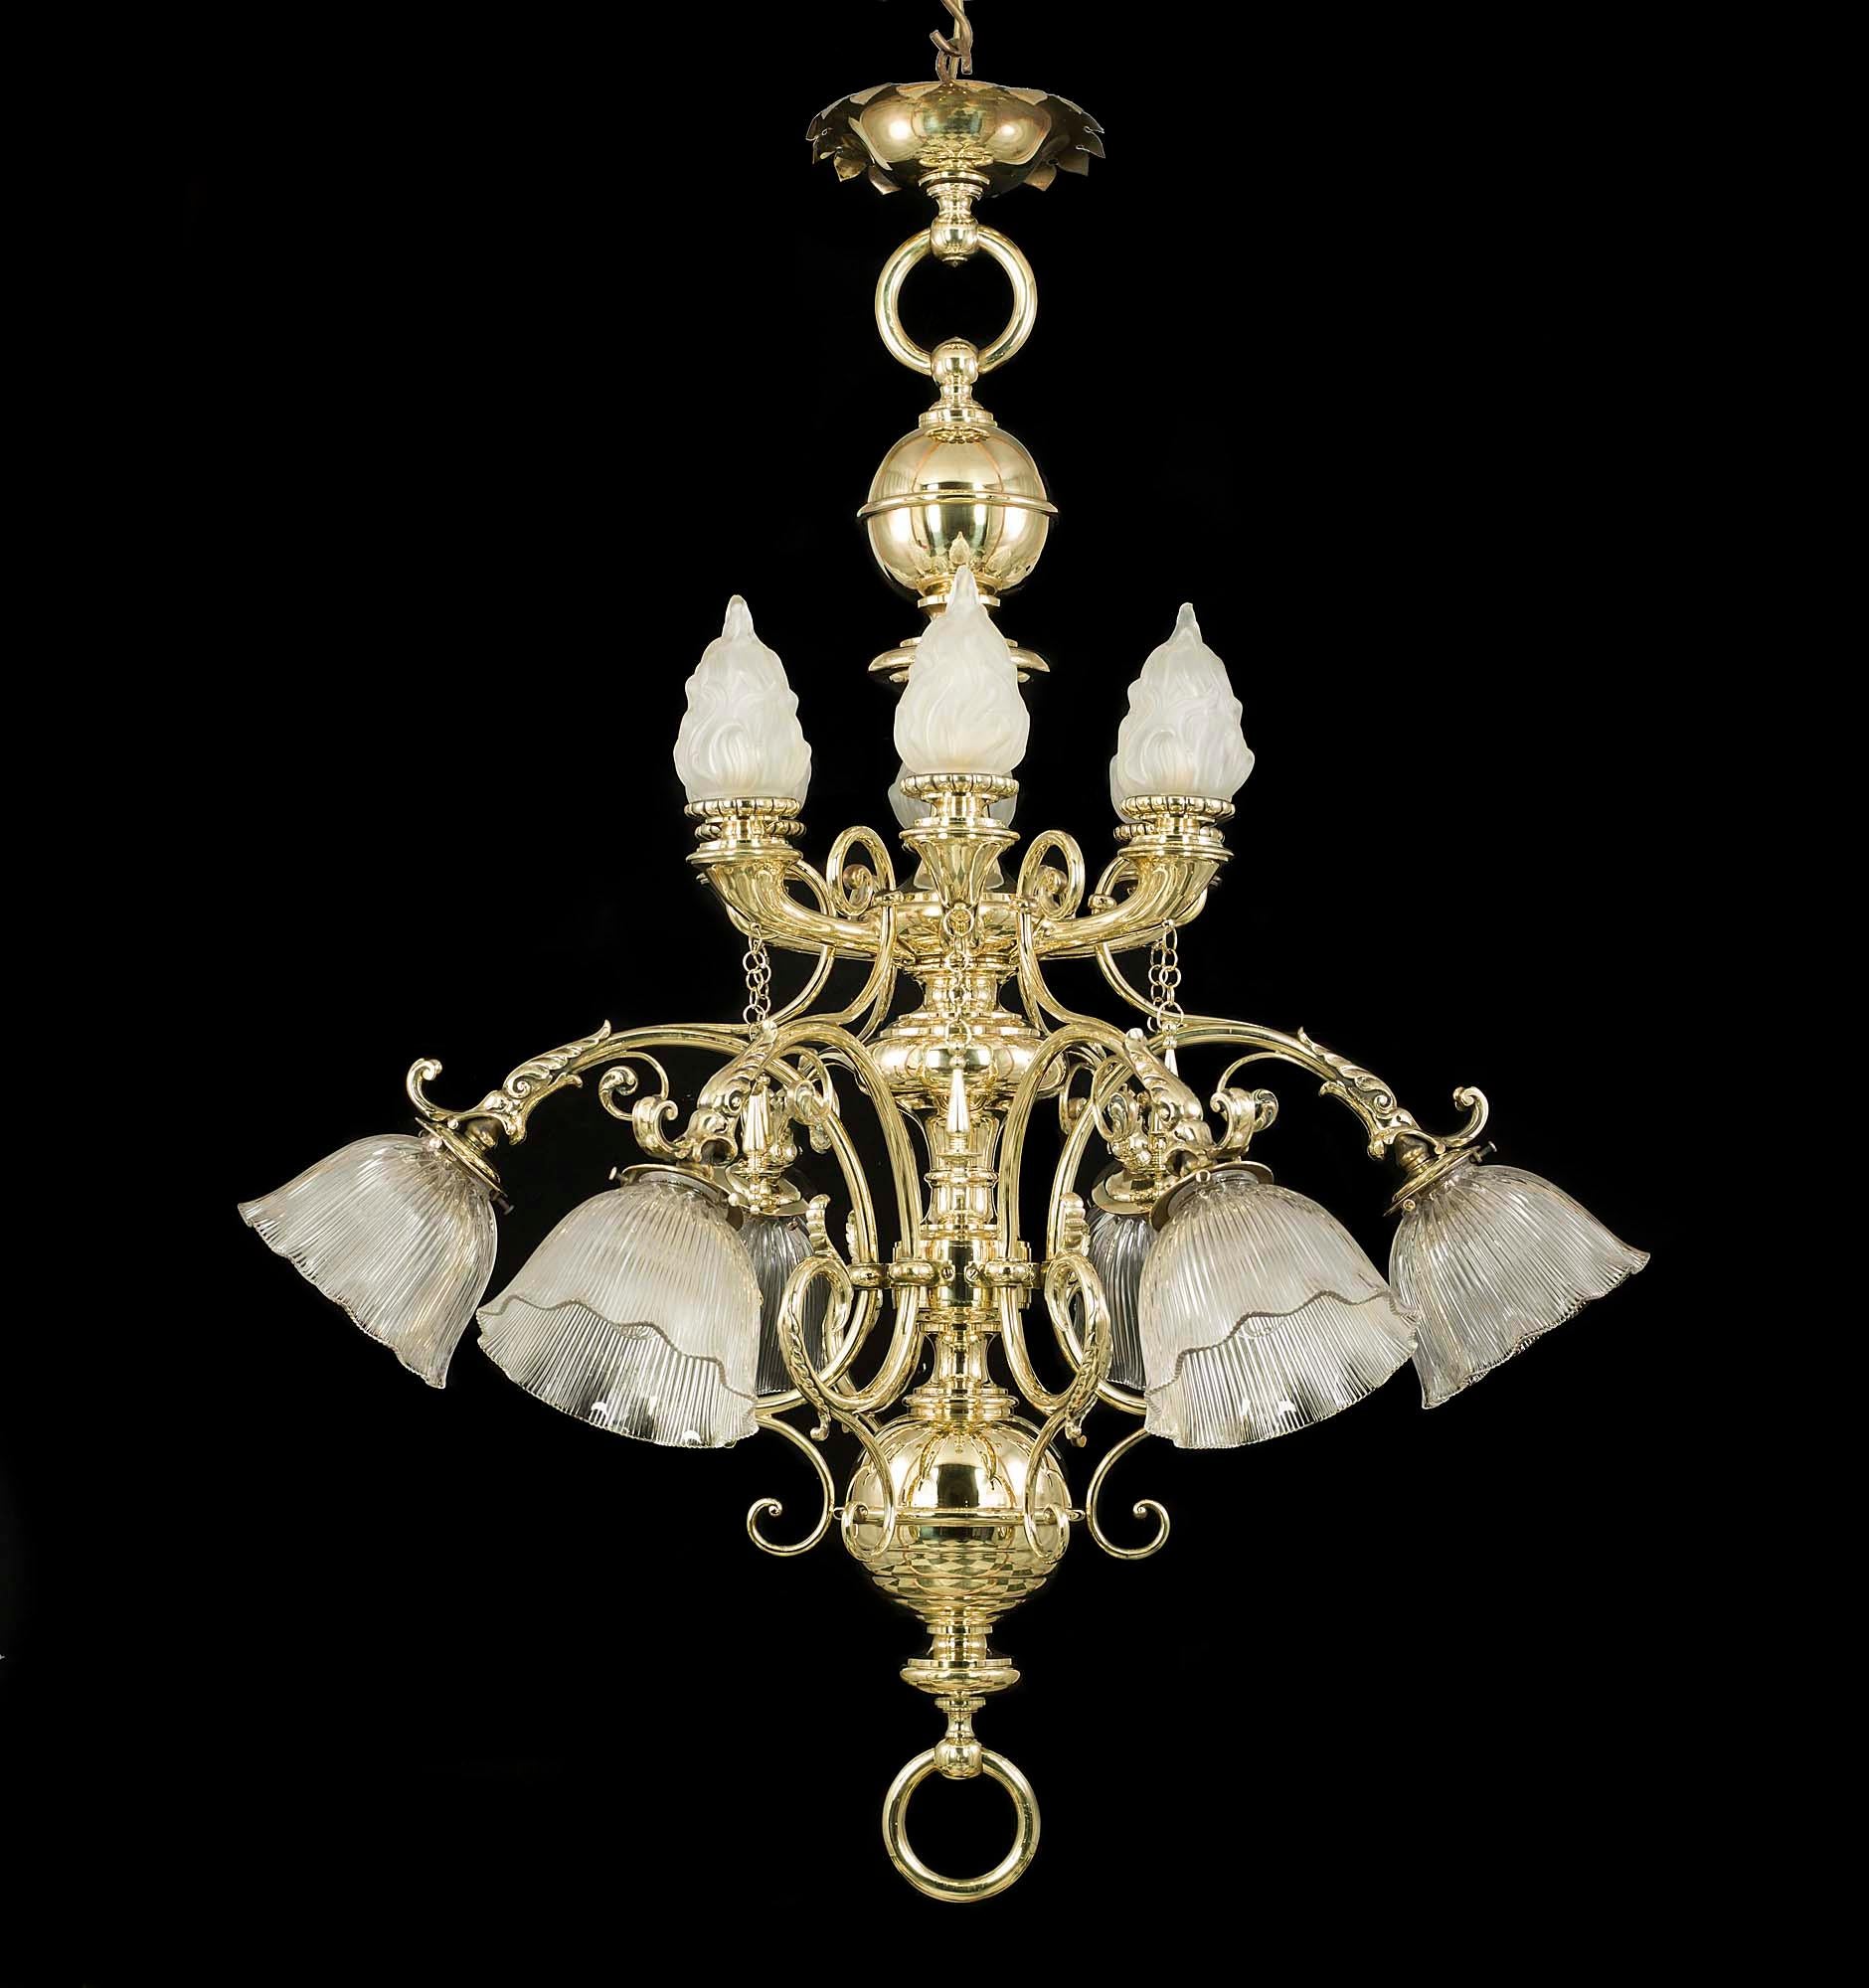 A large and magnificent late Victorian twelve-branch brass antique chandelier. Theatrical and grand the elaborate brass baluster stem has twelve scrolling arms issuing from two graduated tiers, the lights with six frosted glass flambeau shades above